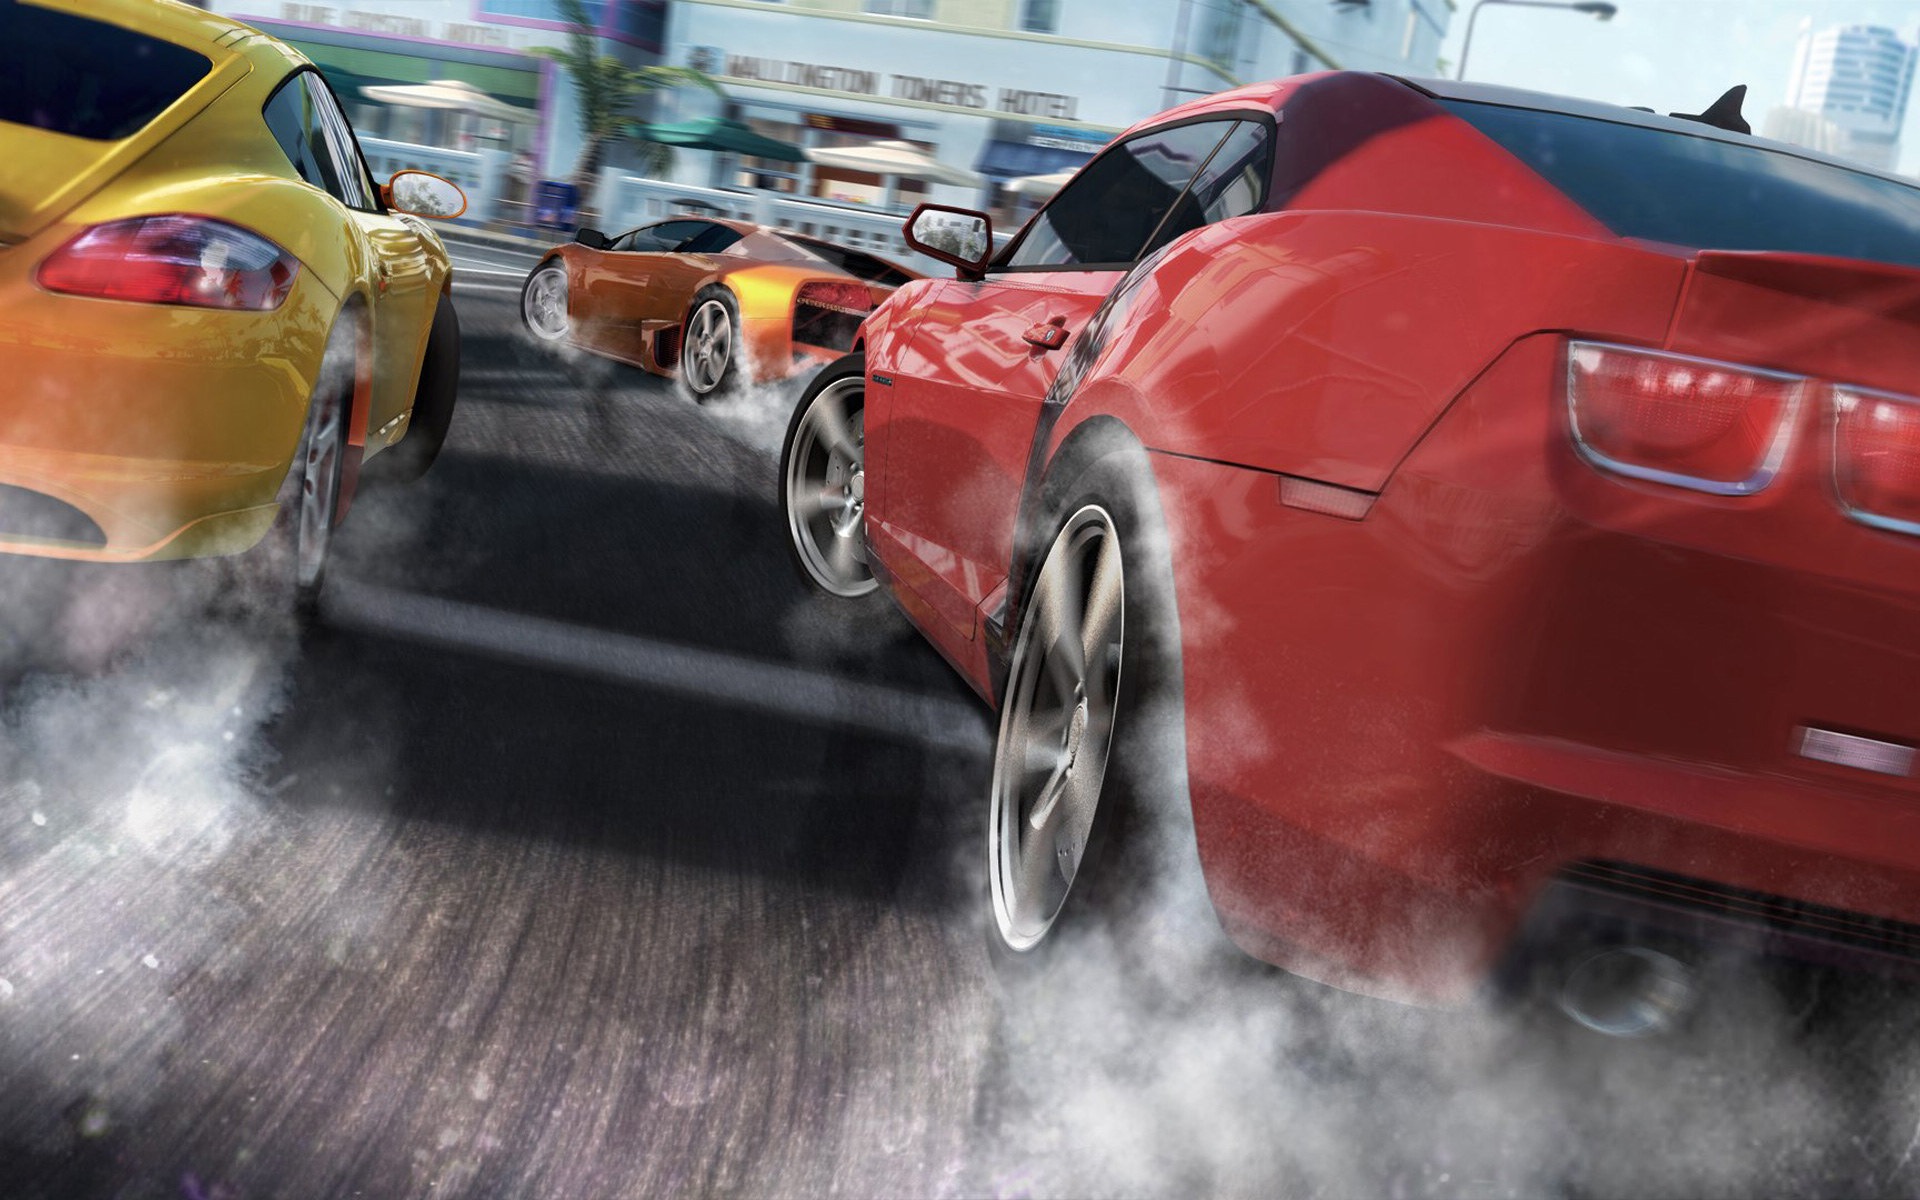 The Crew game HD wallpapers #6 - 1920x1200